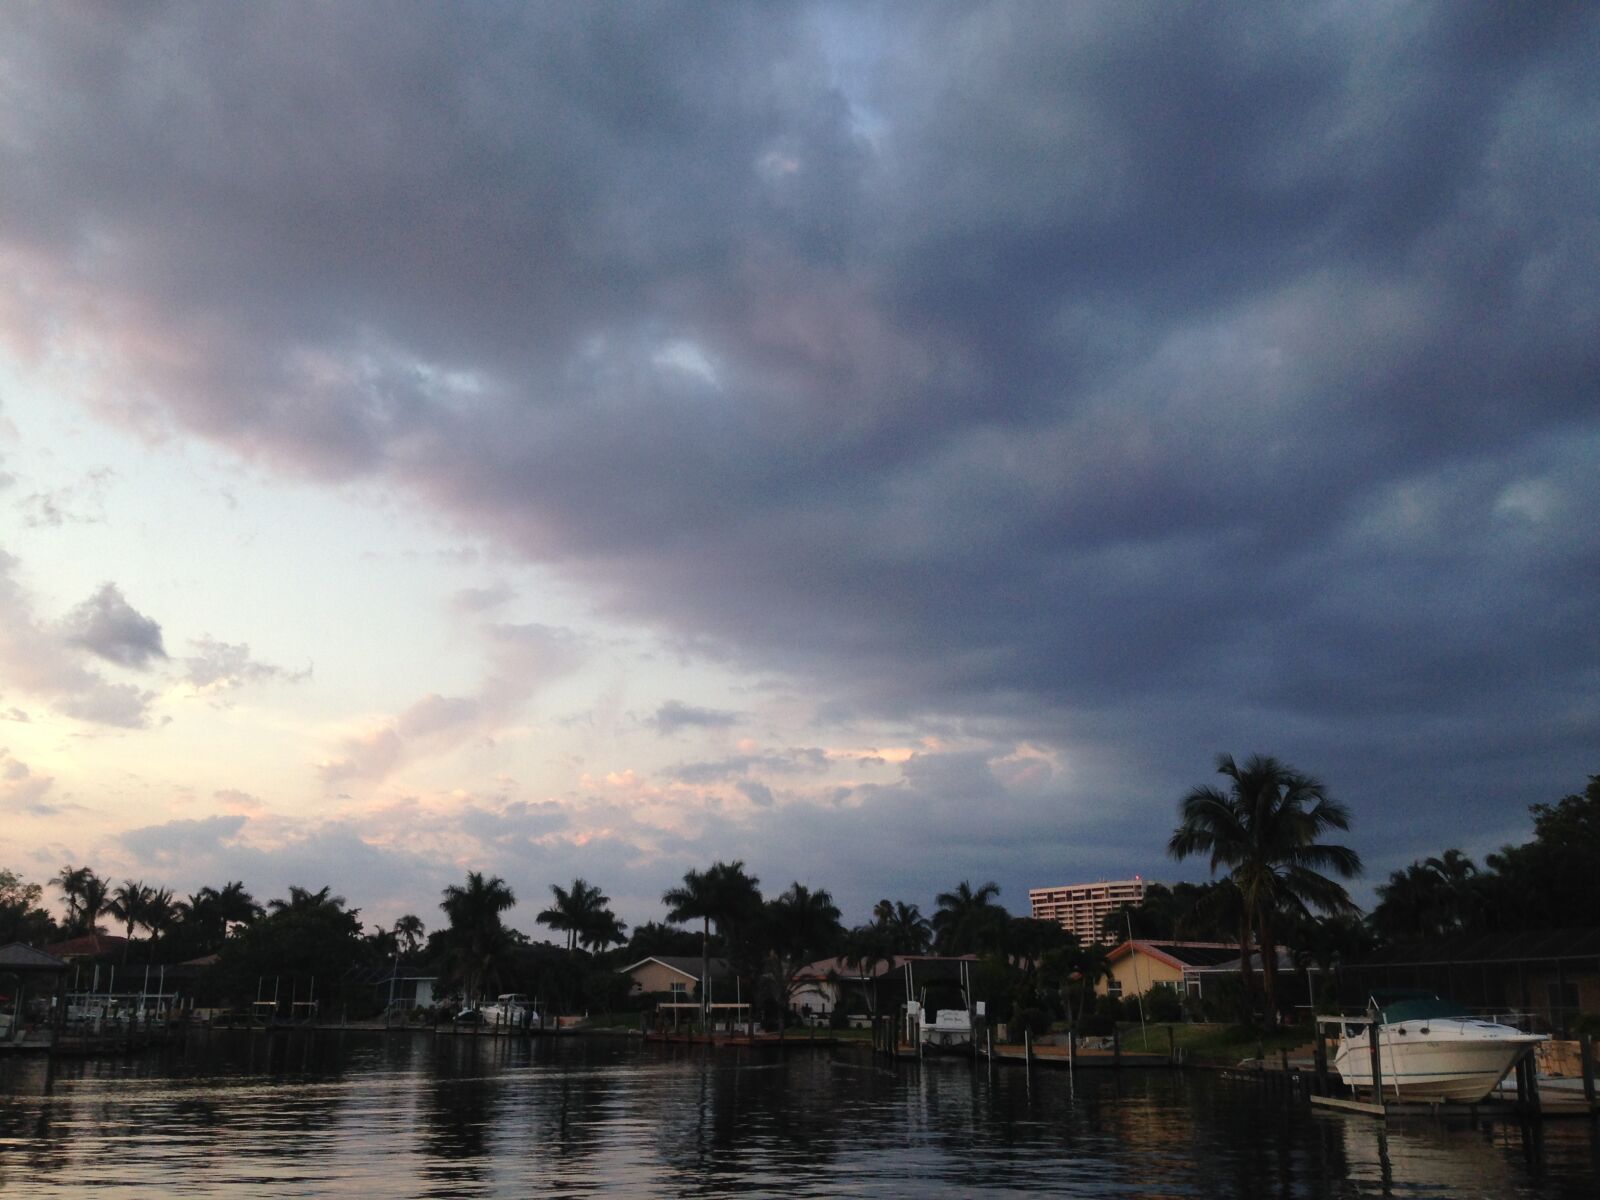 Apple iPhone 5c sample photo. Clouds, florida, houses, nature photography